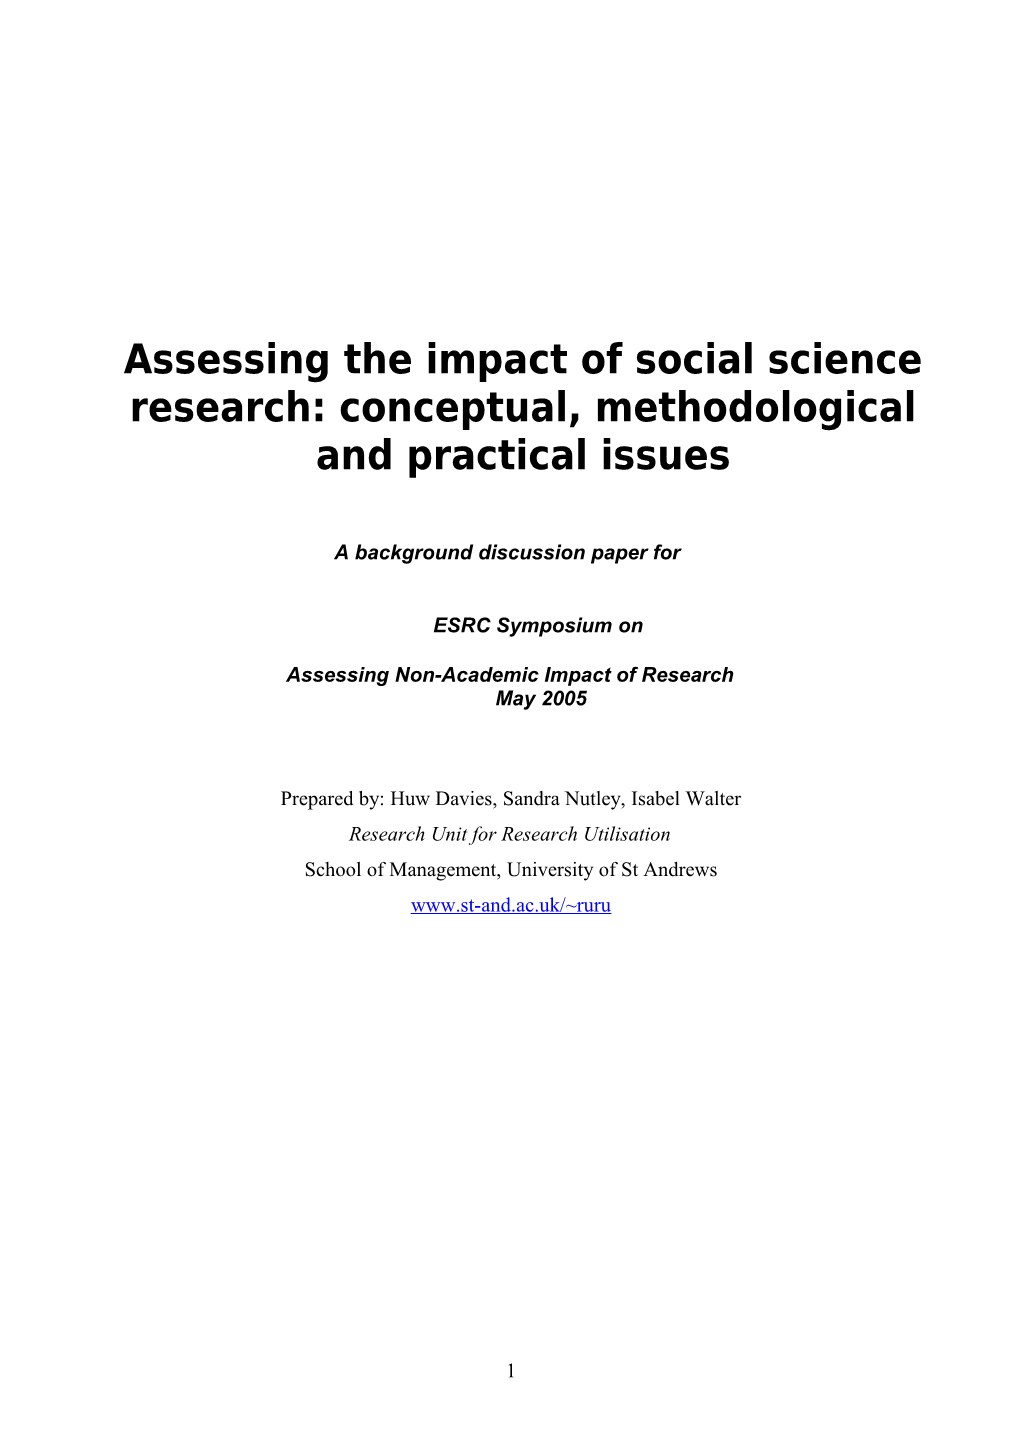 Assessing The Impact Of Social Science Research: Conceptual, Methodological And Practical Issues